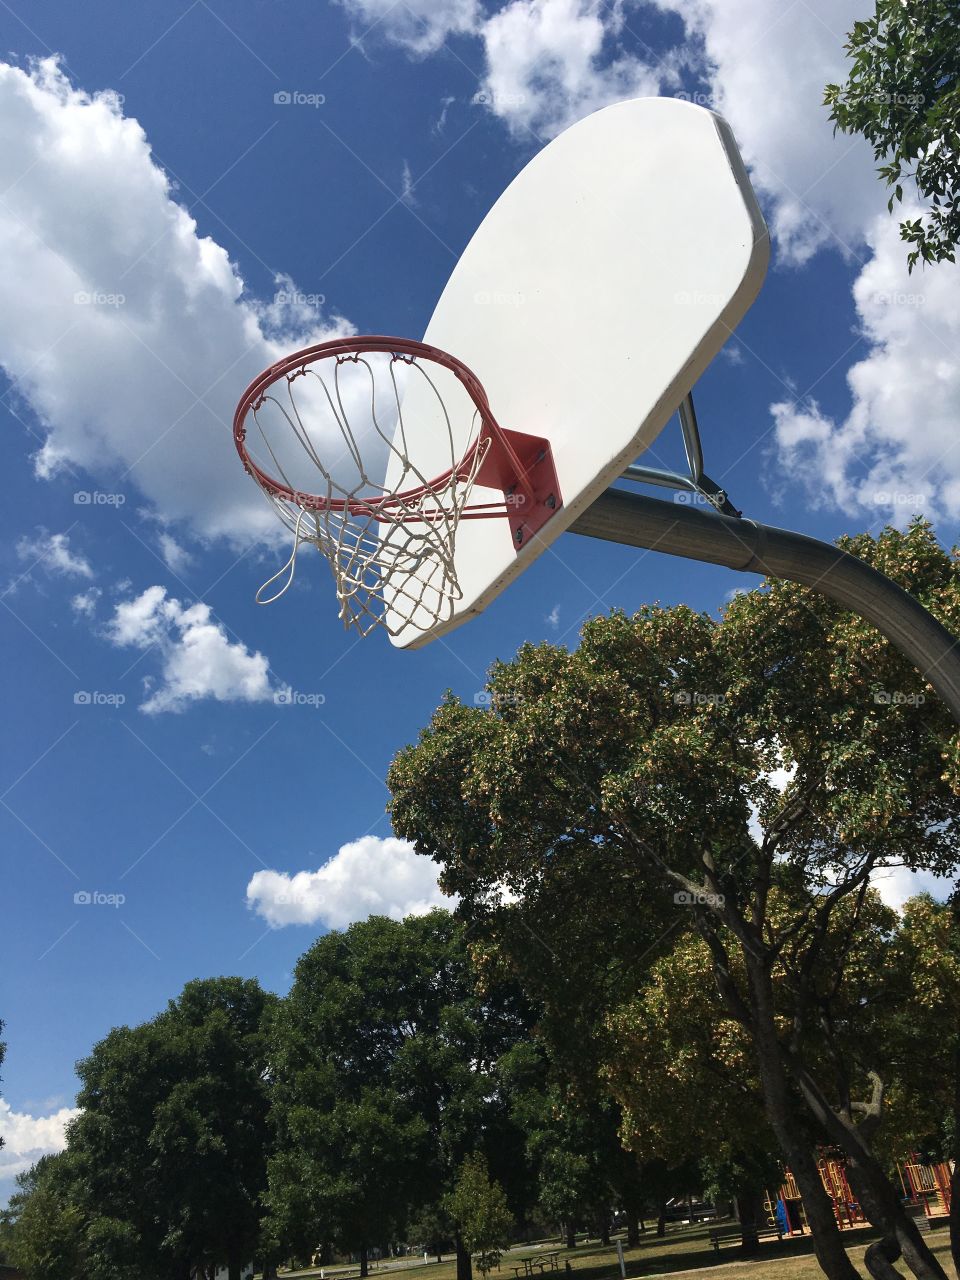 Basketball Net and Blue Sky with Clouds 1